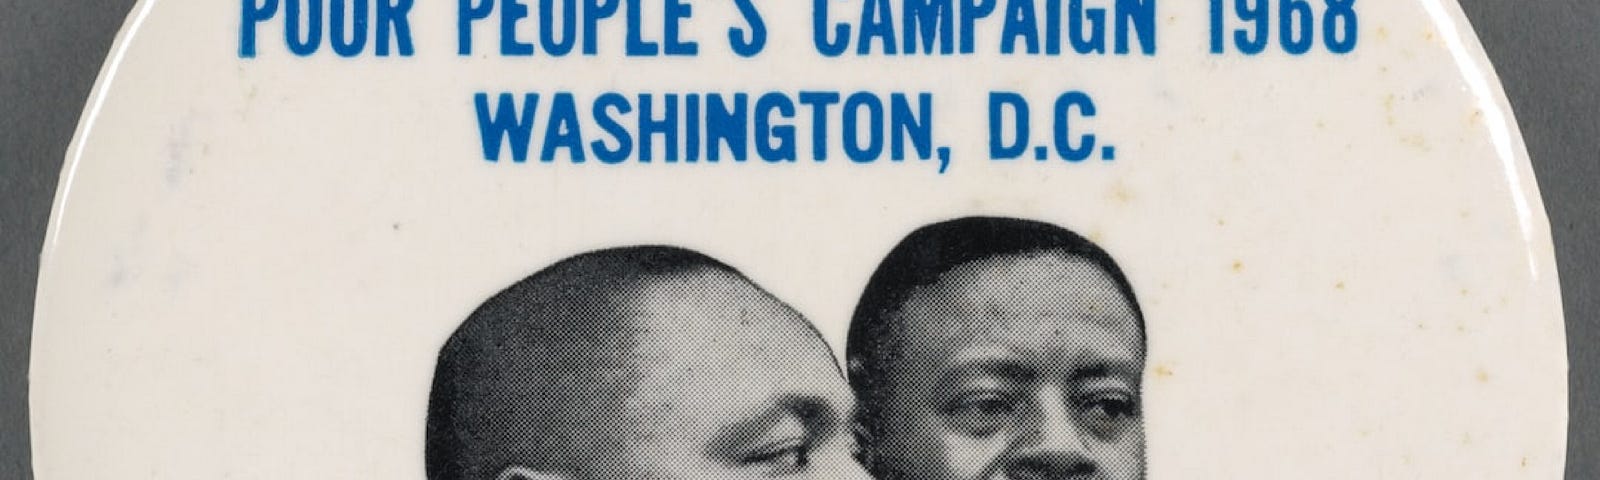 The face of Martin Luther King on a poster for Jobs-income poor peoples campaign 1968 Washington D.C. on the bottom: I Have A Dream famous quote